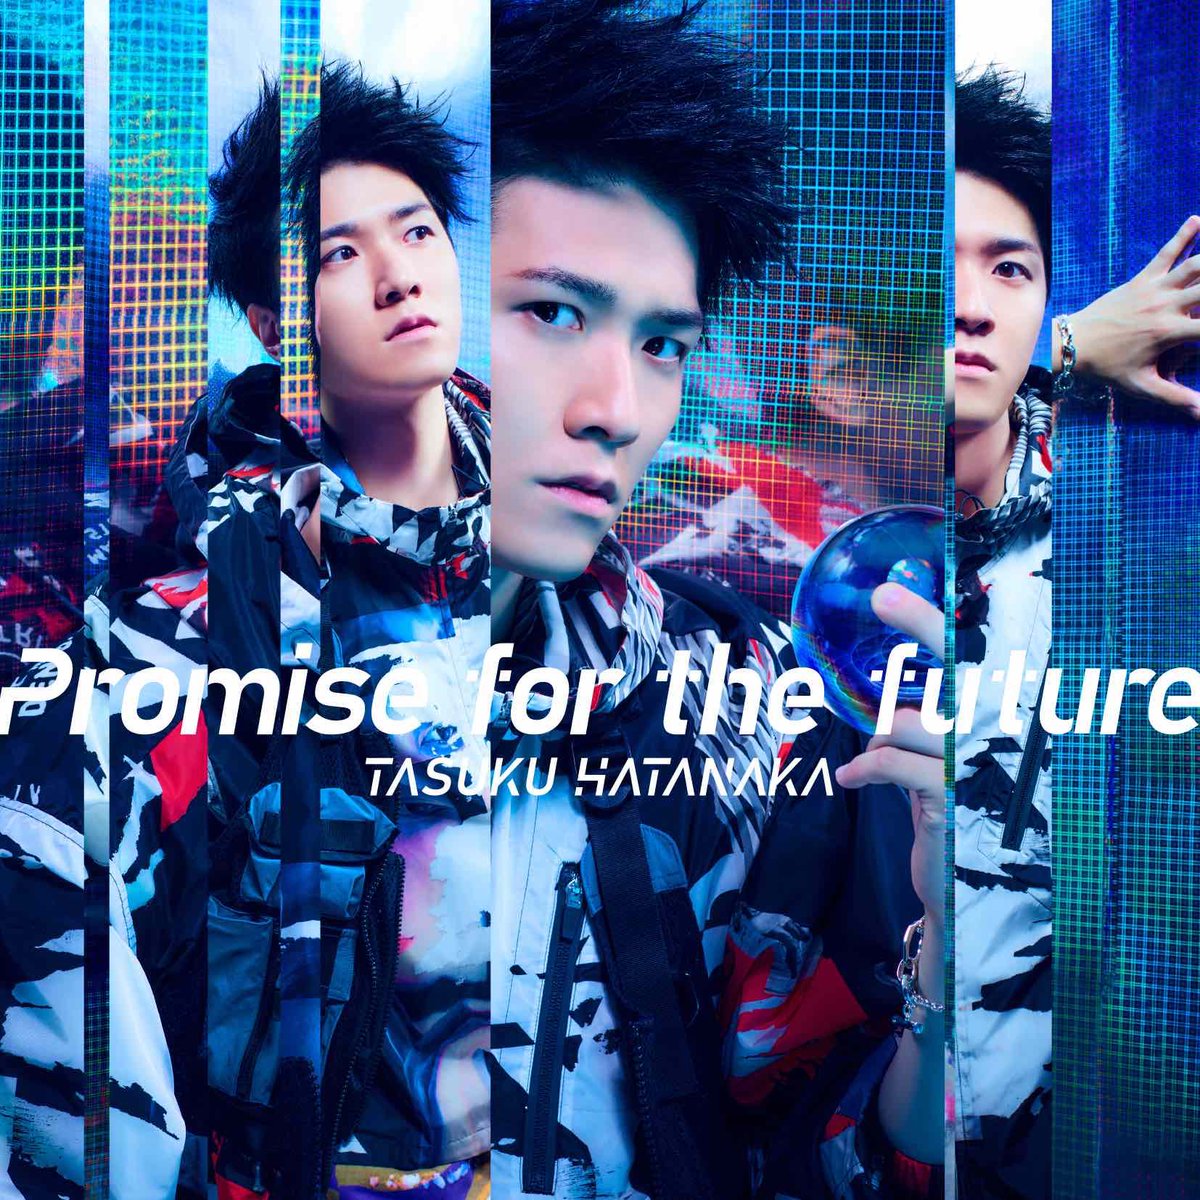 Cover art for『Tasuku Hatanaka - Promise for the future』from the release『Promise for the future